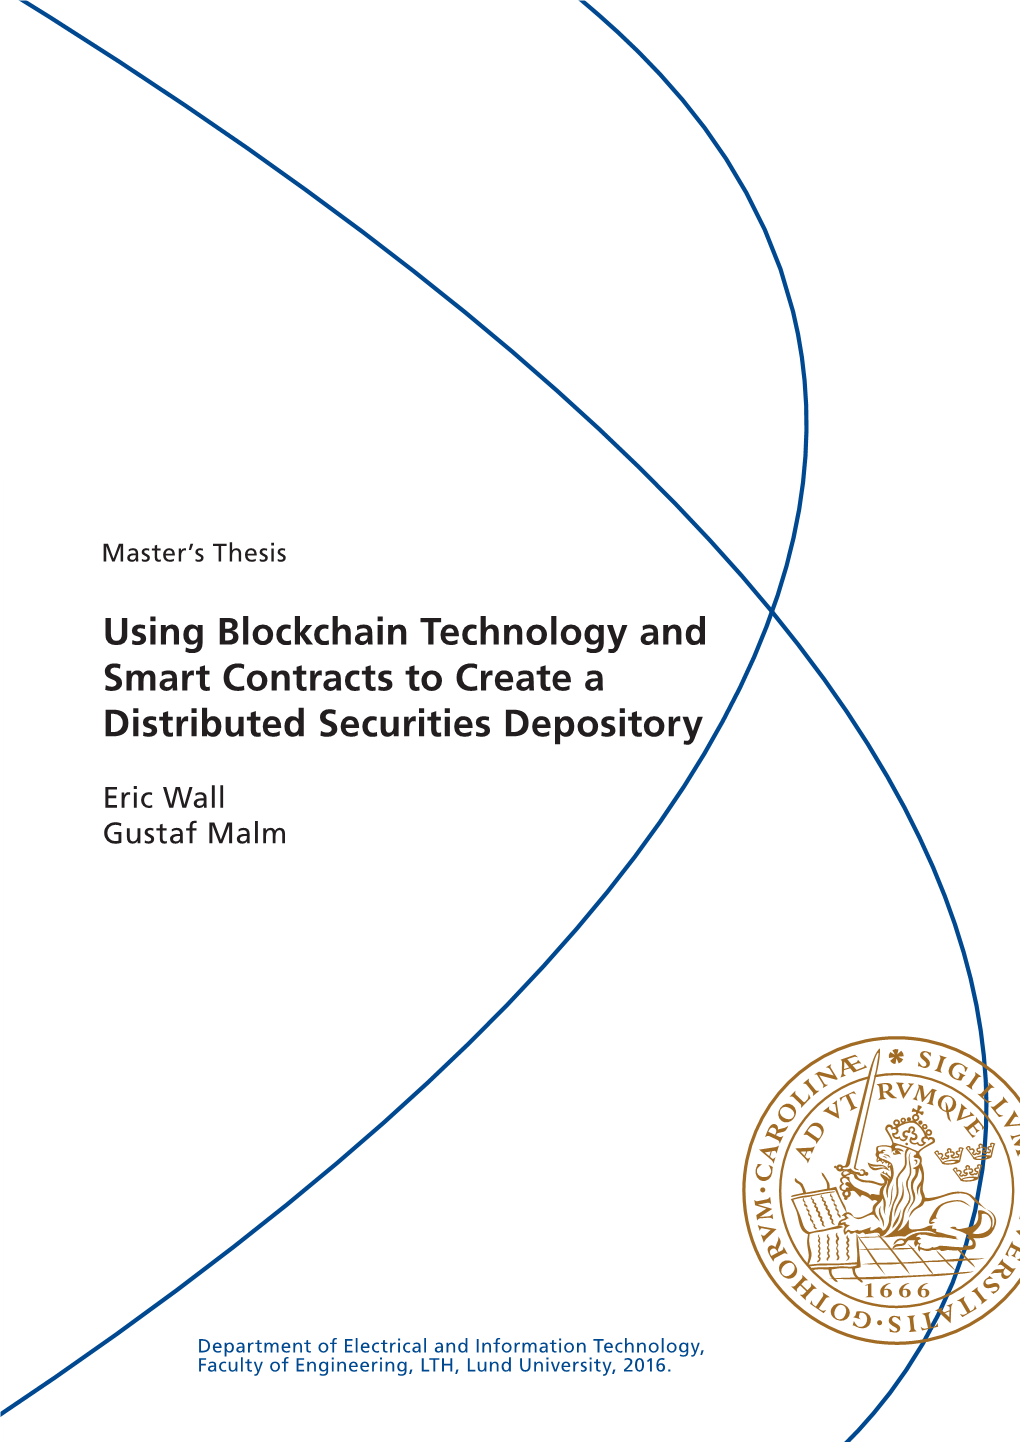 Using Blockchain Technology and Smart Contracts to Create A